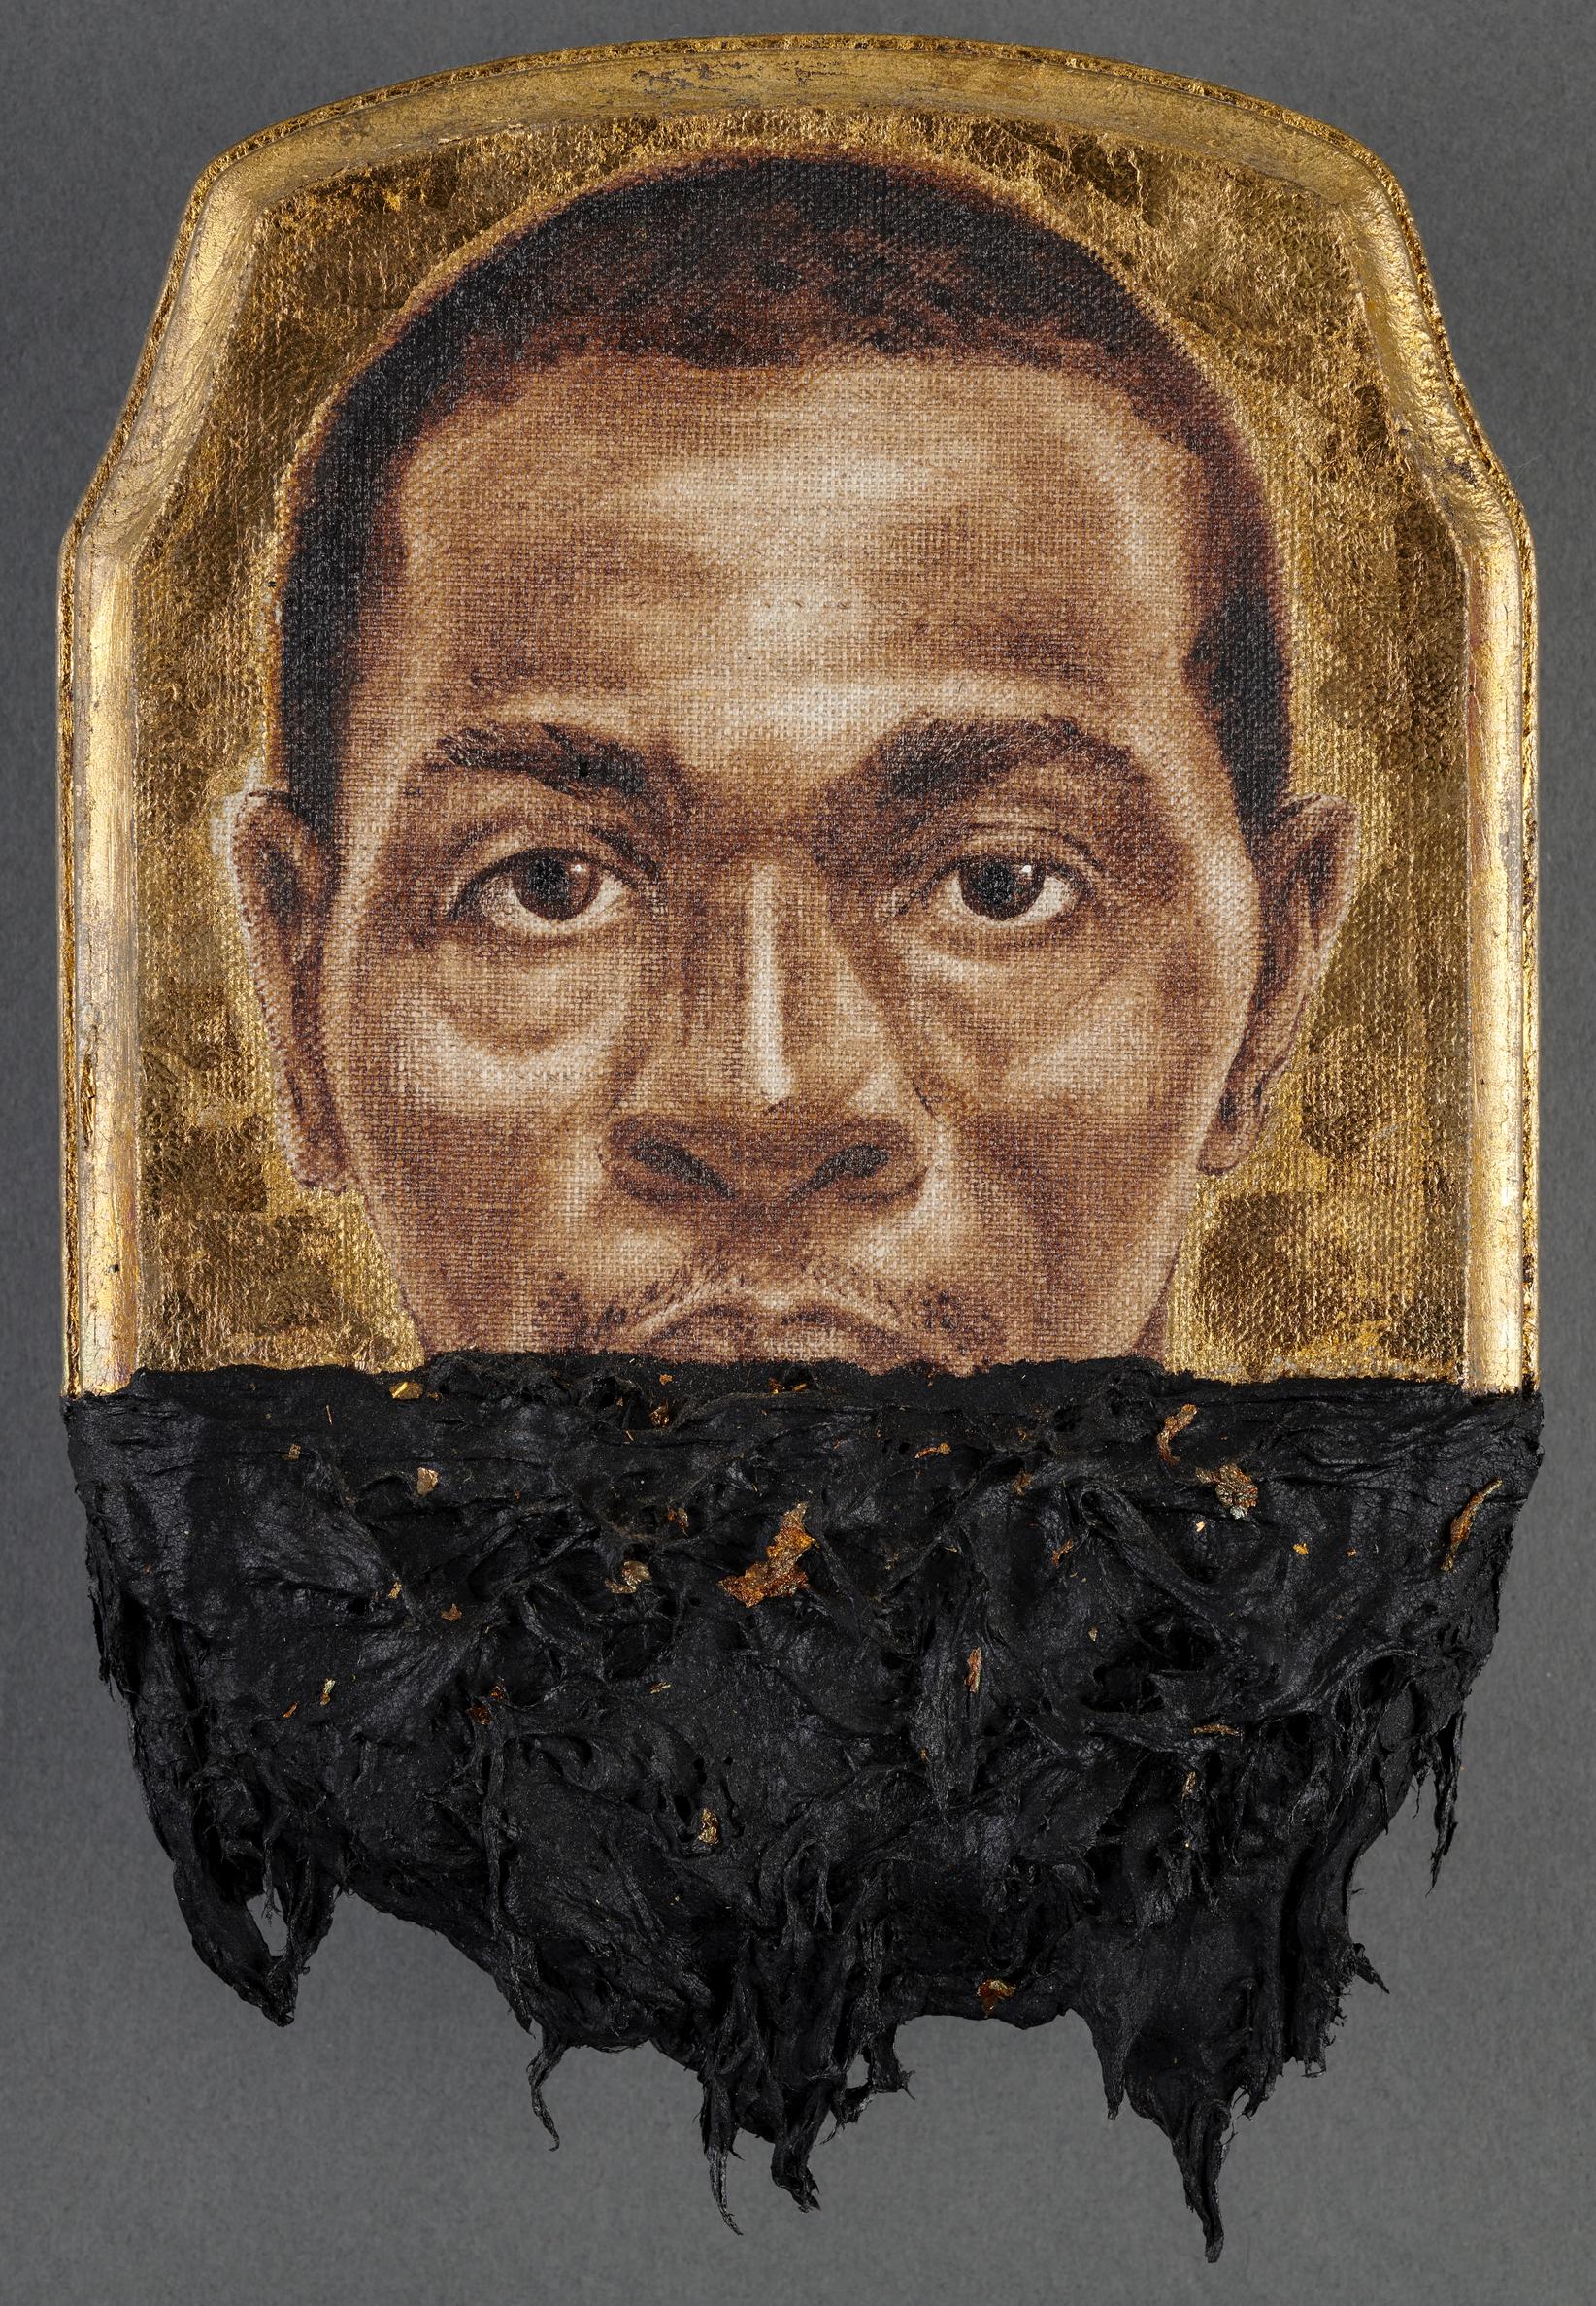 Titus Kaphar, Jerome II, 2014. Oil, tar, and gold leaf on panel. 25.4 x 17.8 x 2.5 cm (10 x 7 x 1 in.). Tracey and Phillip Riese.